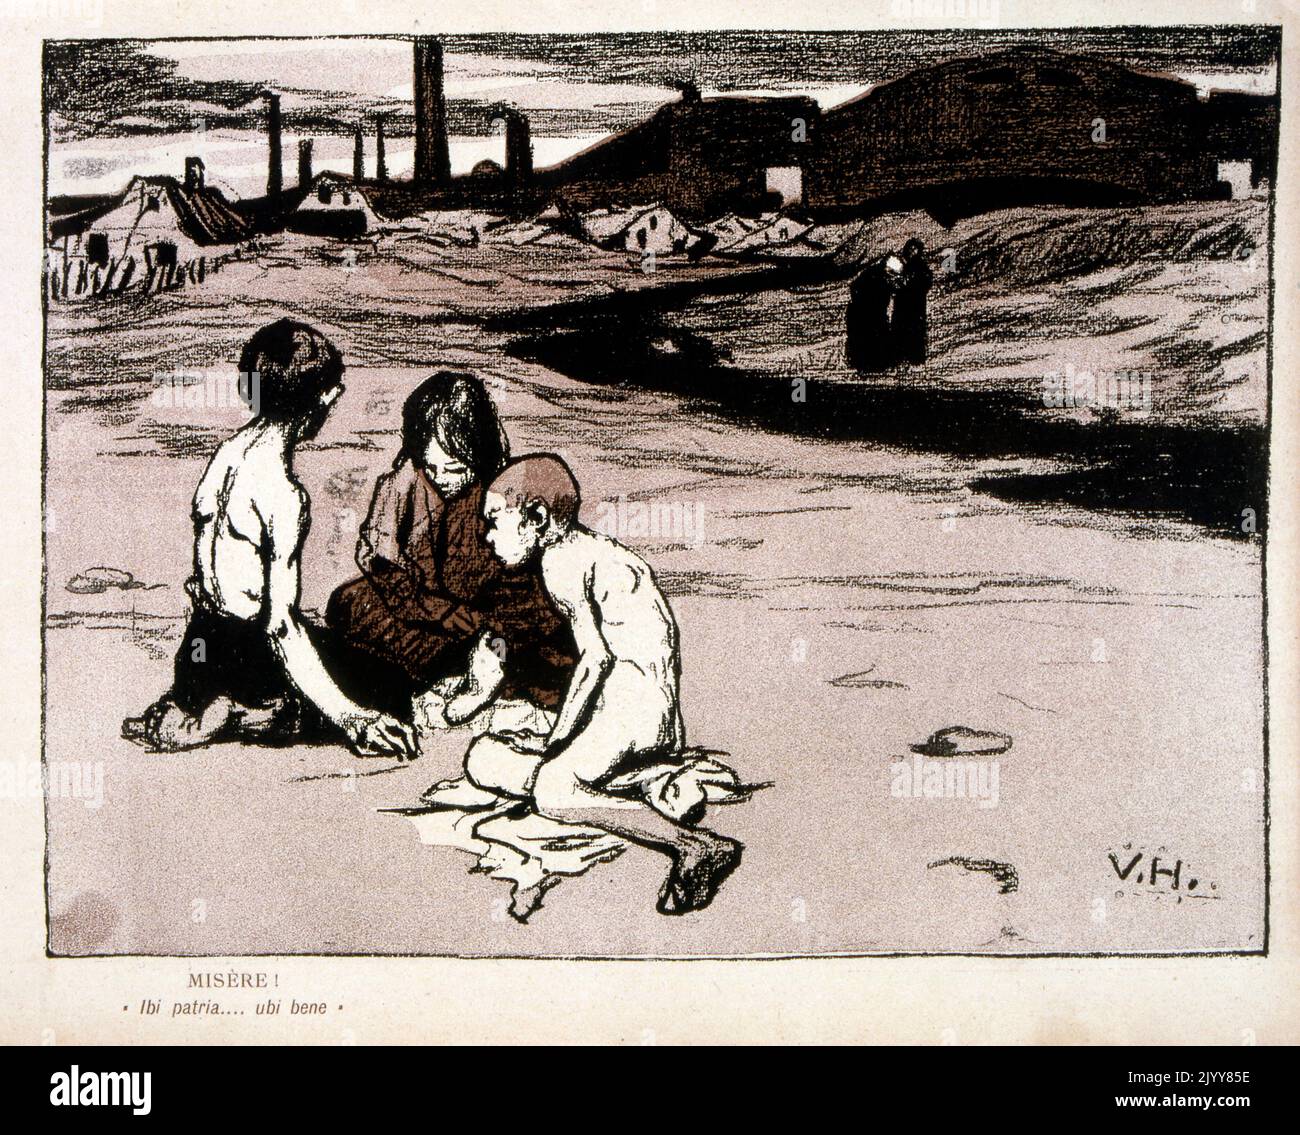 In L'Assiette au Beurre satirical magazine; colour drawing of three children playing in a waste land, signed V.H. and entitled 'Misery'. Stock Photo